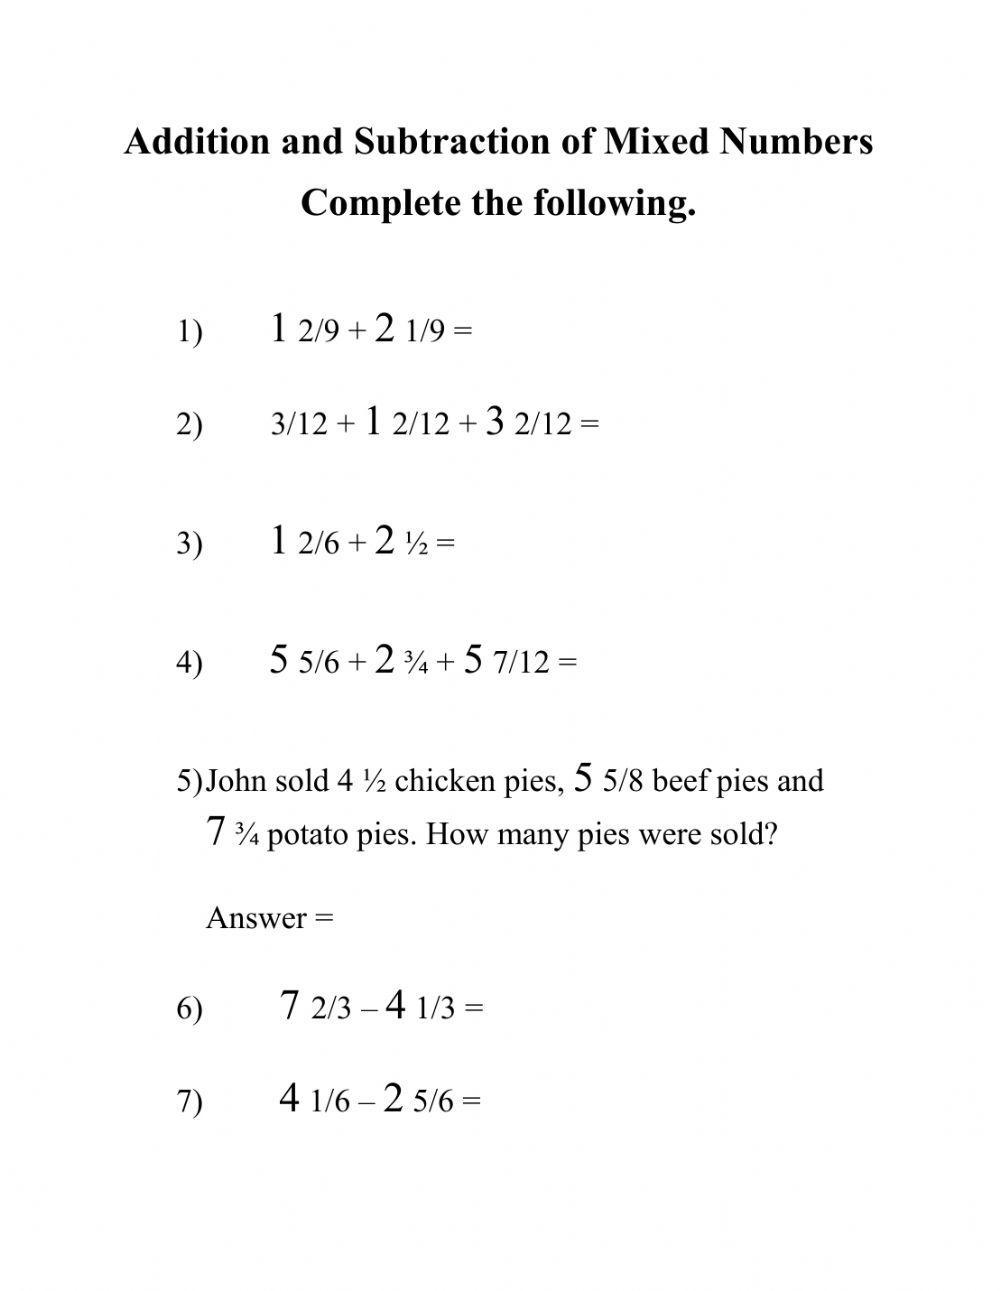 Addition and Subtractions of Mixed Numbers